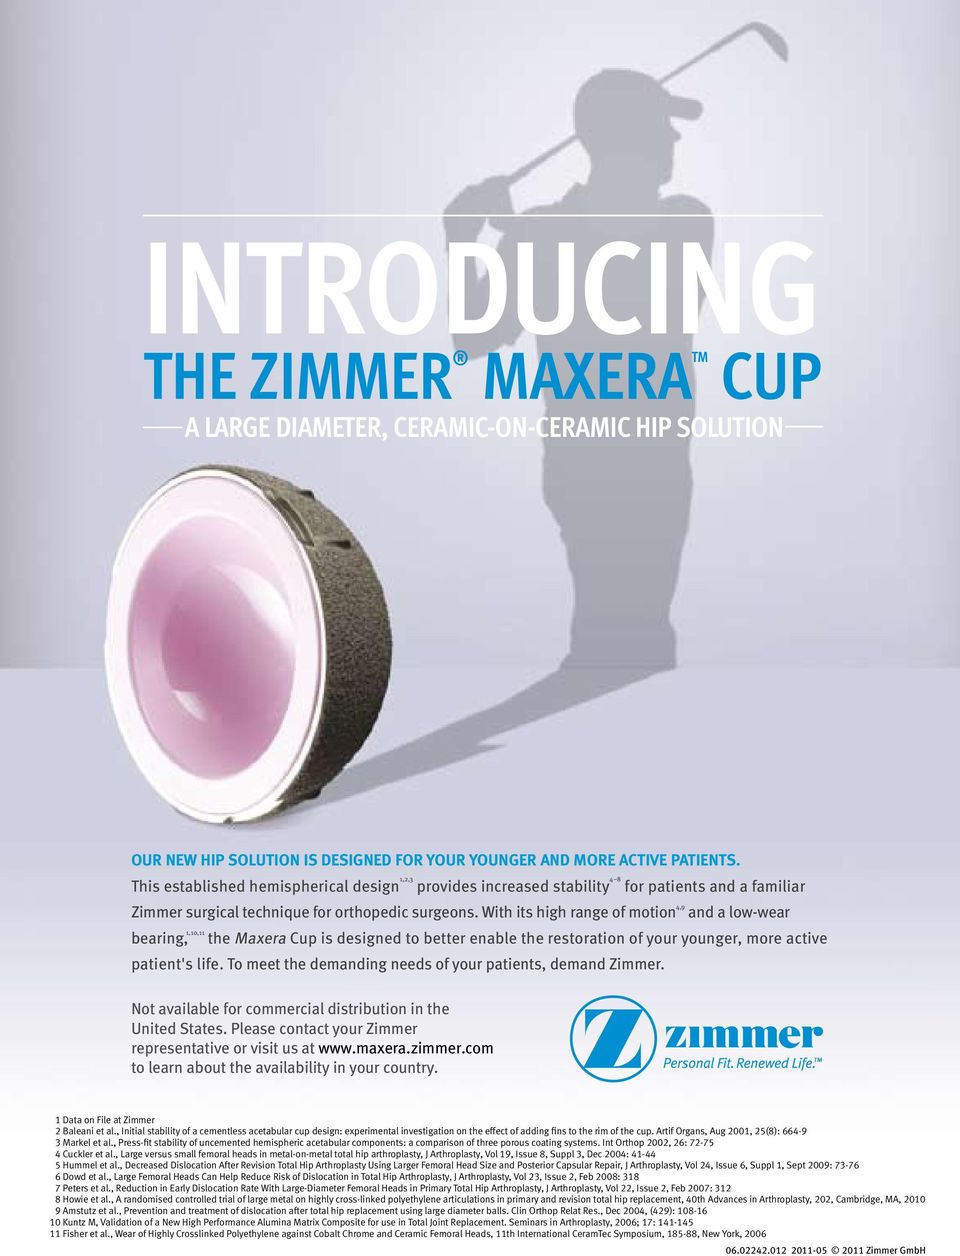 With its high range of motion 4,9 and a low-wear bearing, 1,10,11 the Maxera Cup is designed to better enable the restoration of your younger, more active patient's life.